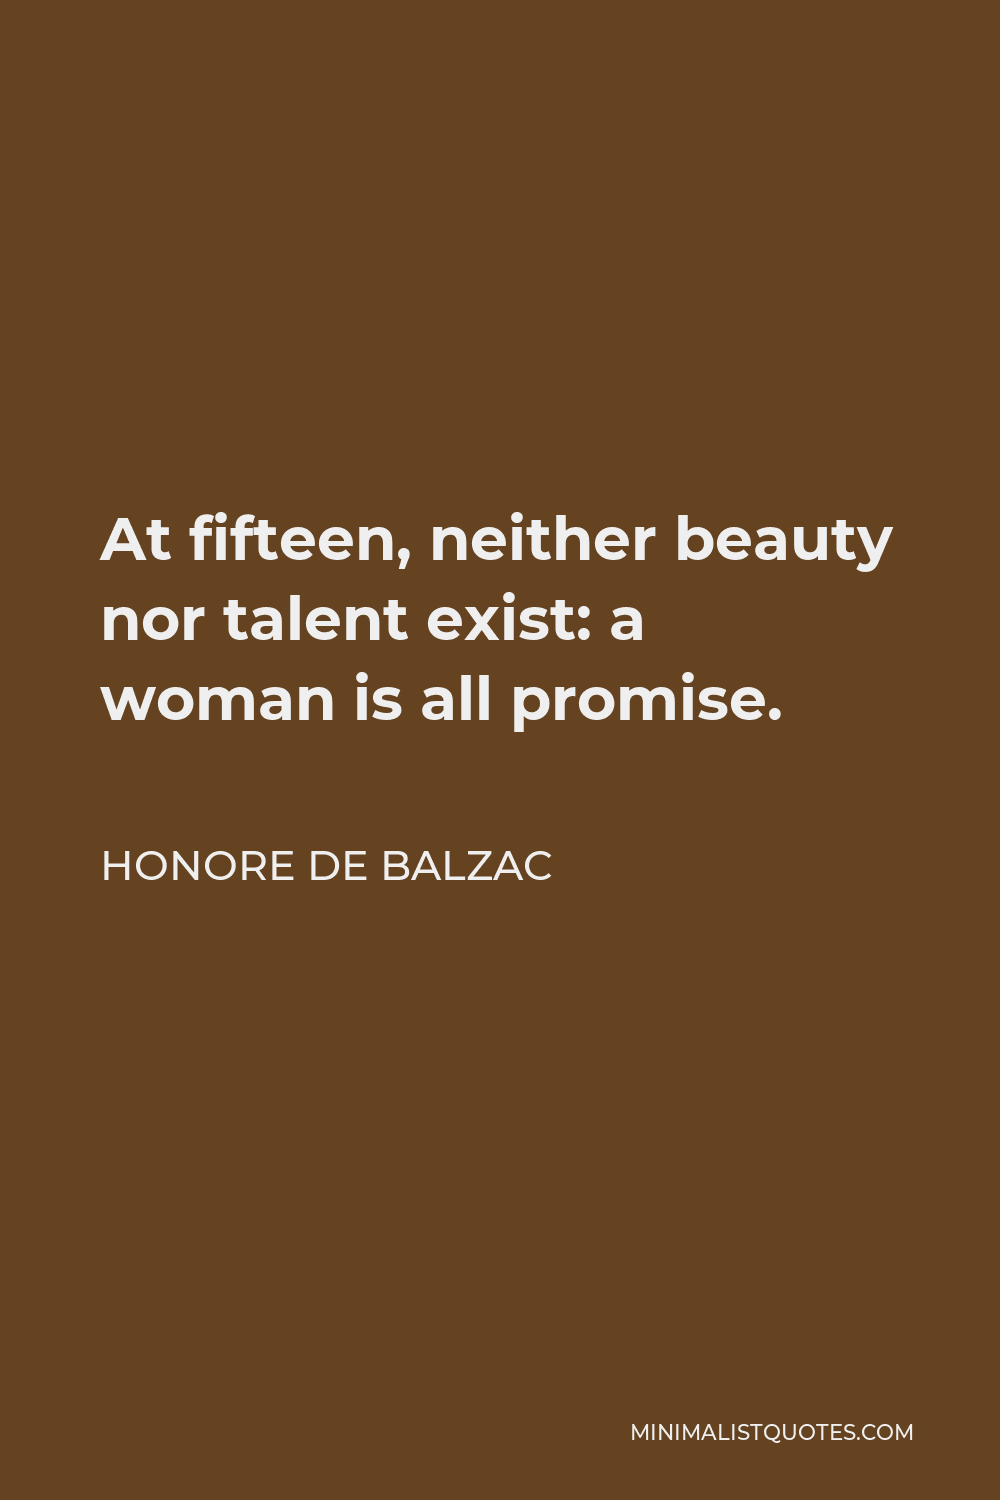 Honore de Balzac Quote - At fifteen, neither beauty nor talent exist: a woman is all promise.